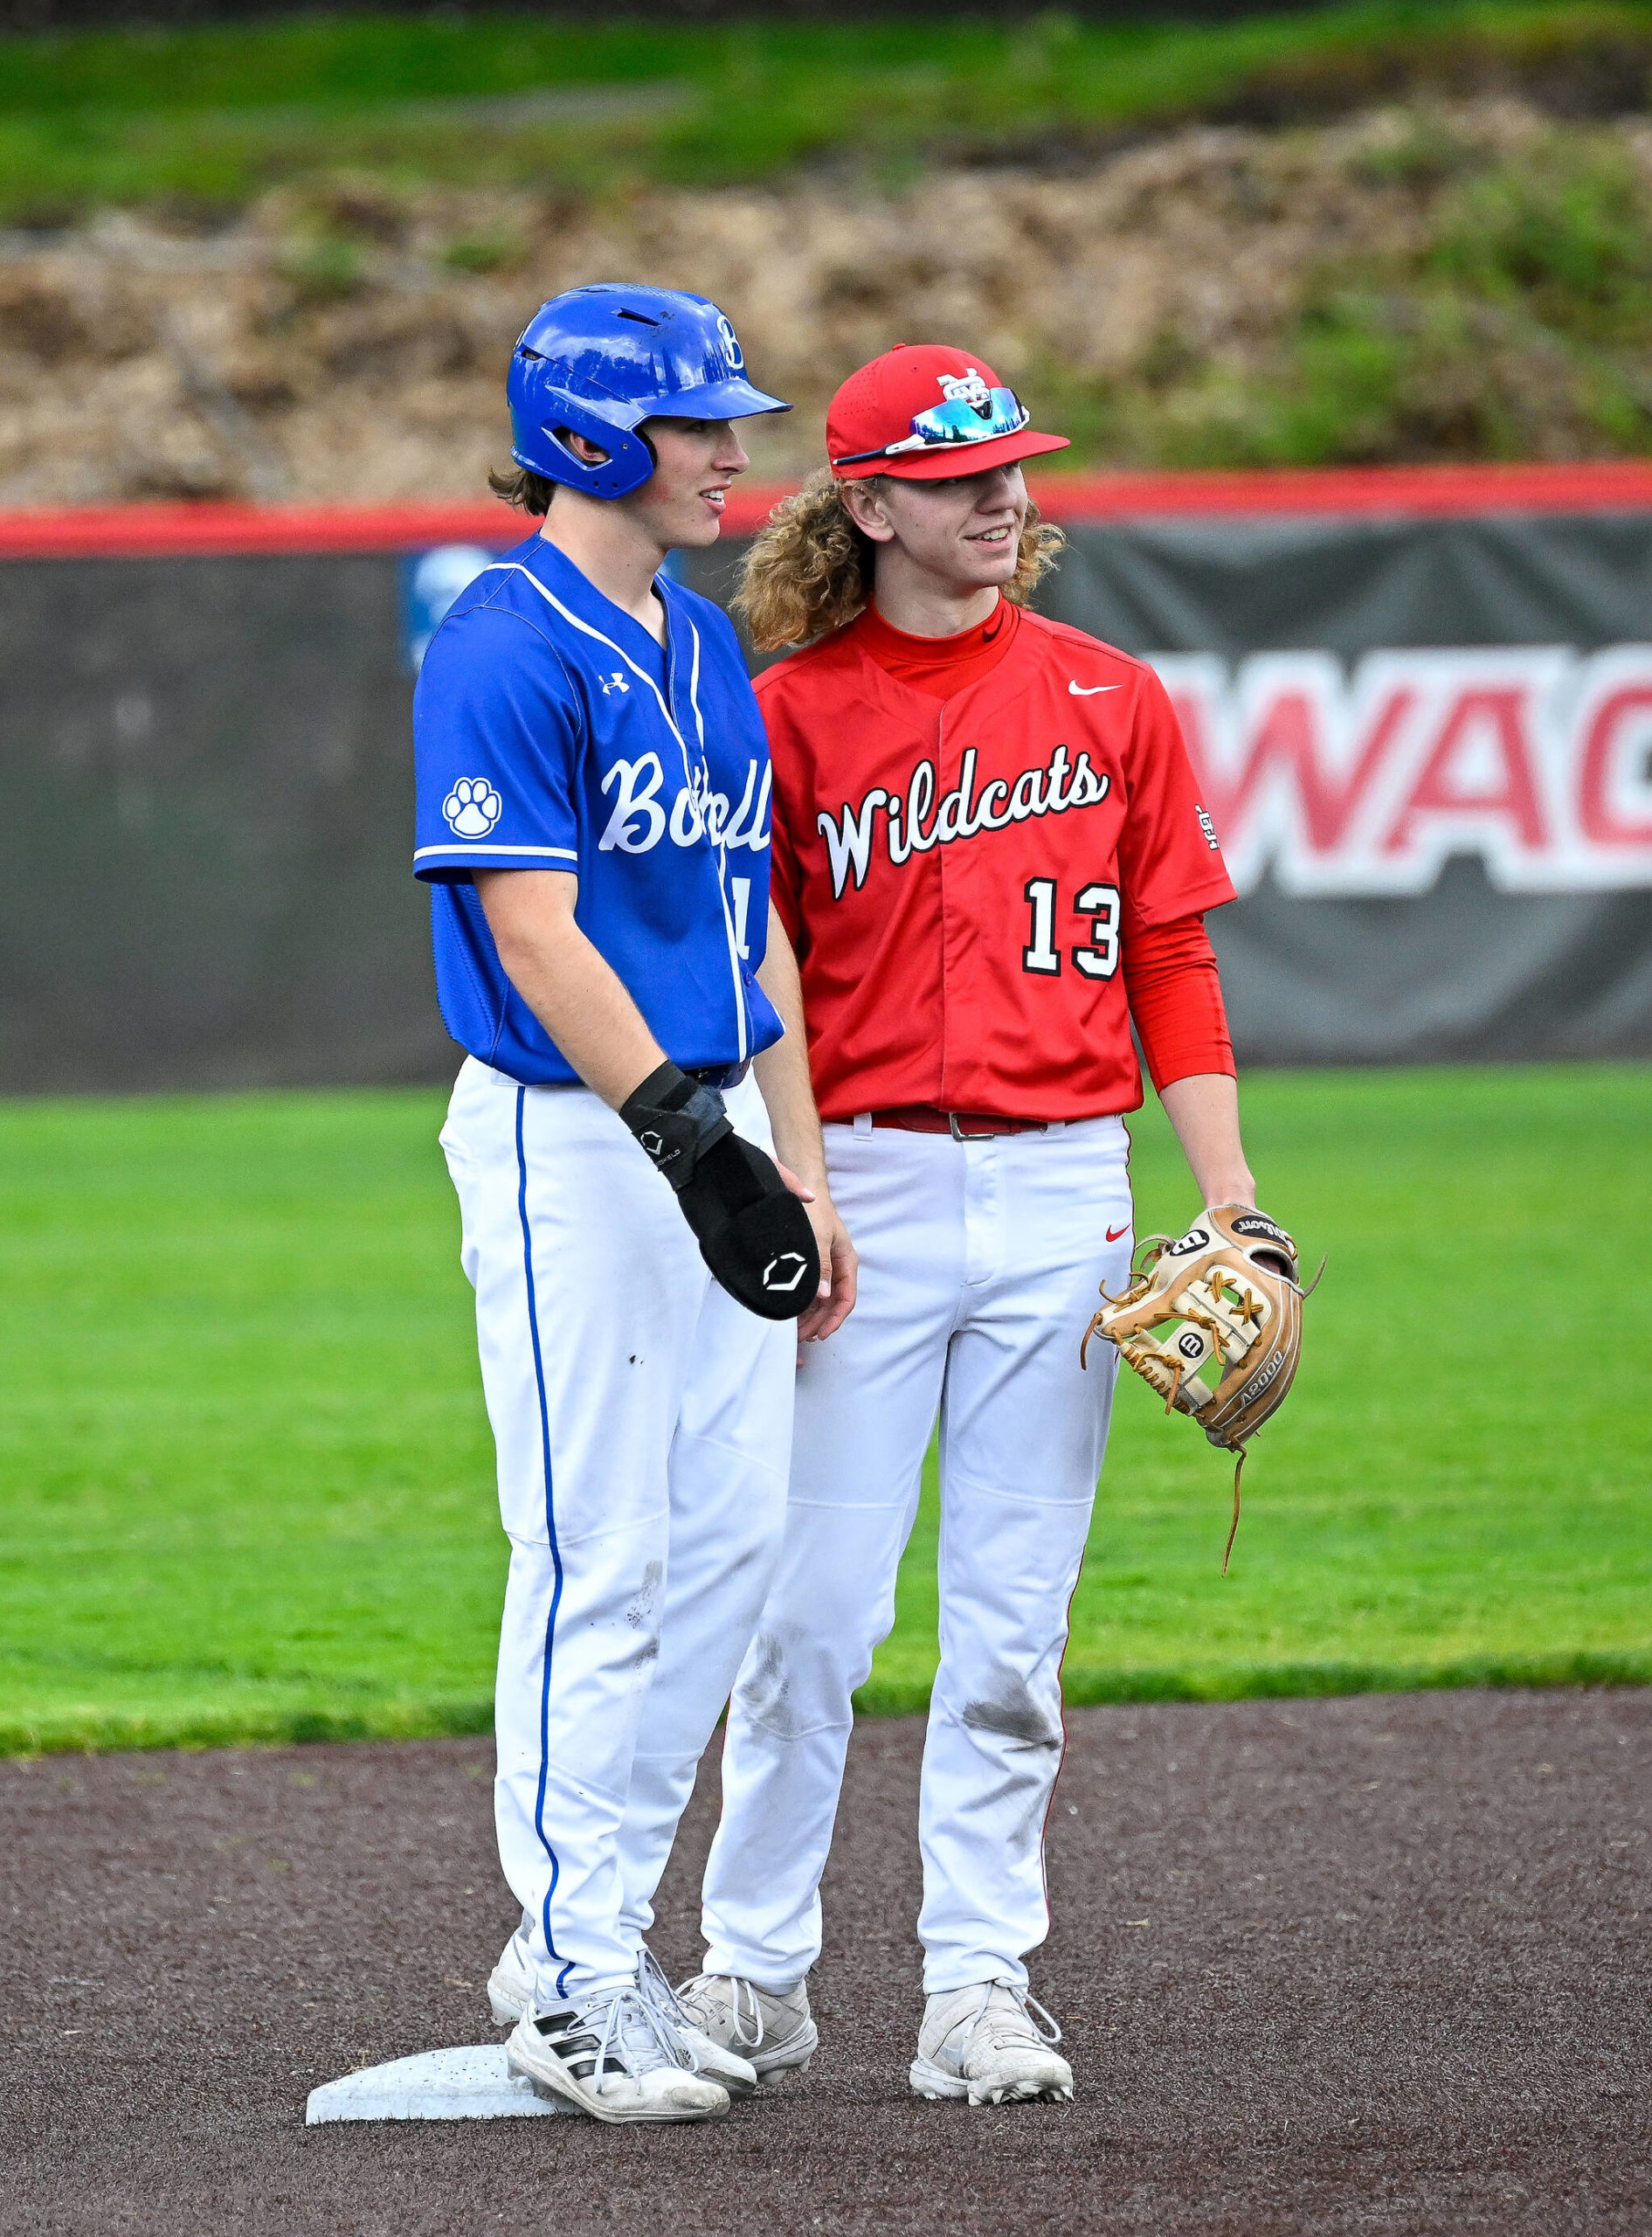 A player from Bothell High School and Mount Si share a laugh on the field. Courtesy of Patrick Krohn.